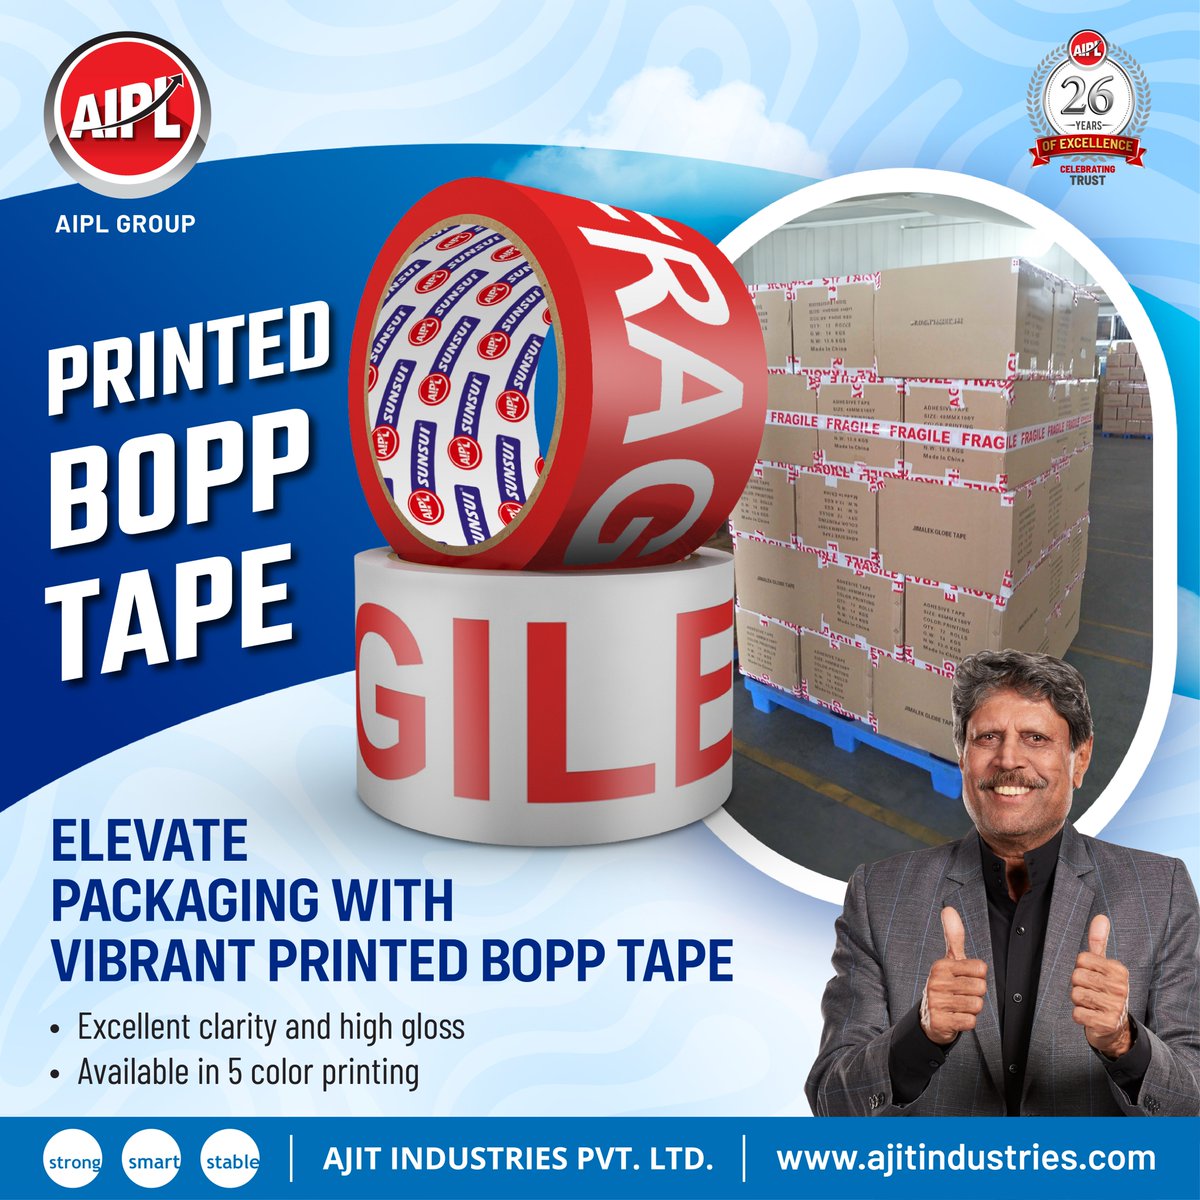 📷 Add a pop of personality to your packages and make every delivery a delight.

#AIPLGroup #AIPL #Ajitindustries #Bopptape #Packaging #AdhesiveTape #IndustrialEssentials #EfficiencyUnleashed #packagingindustrie #BoppTape #PackagingPerfection #PackagingPerfection #BoppTapeMagic